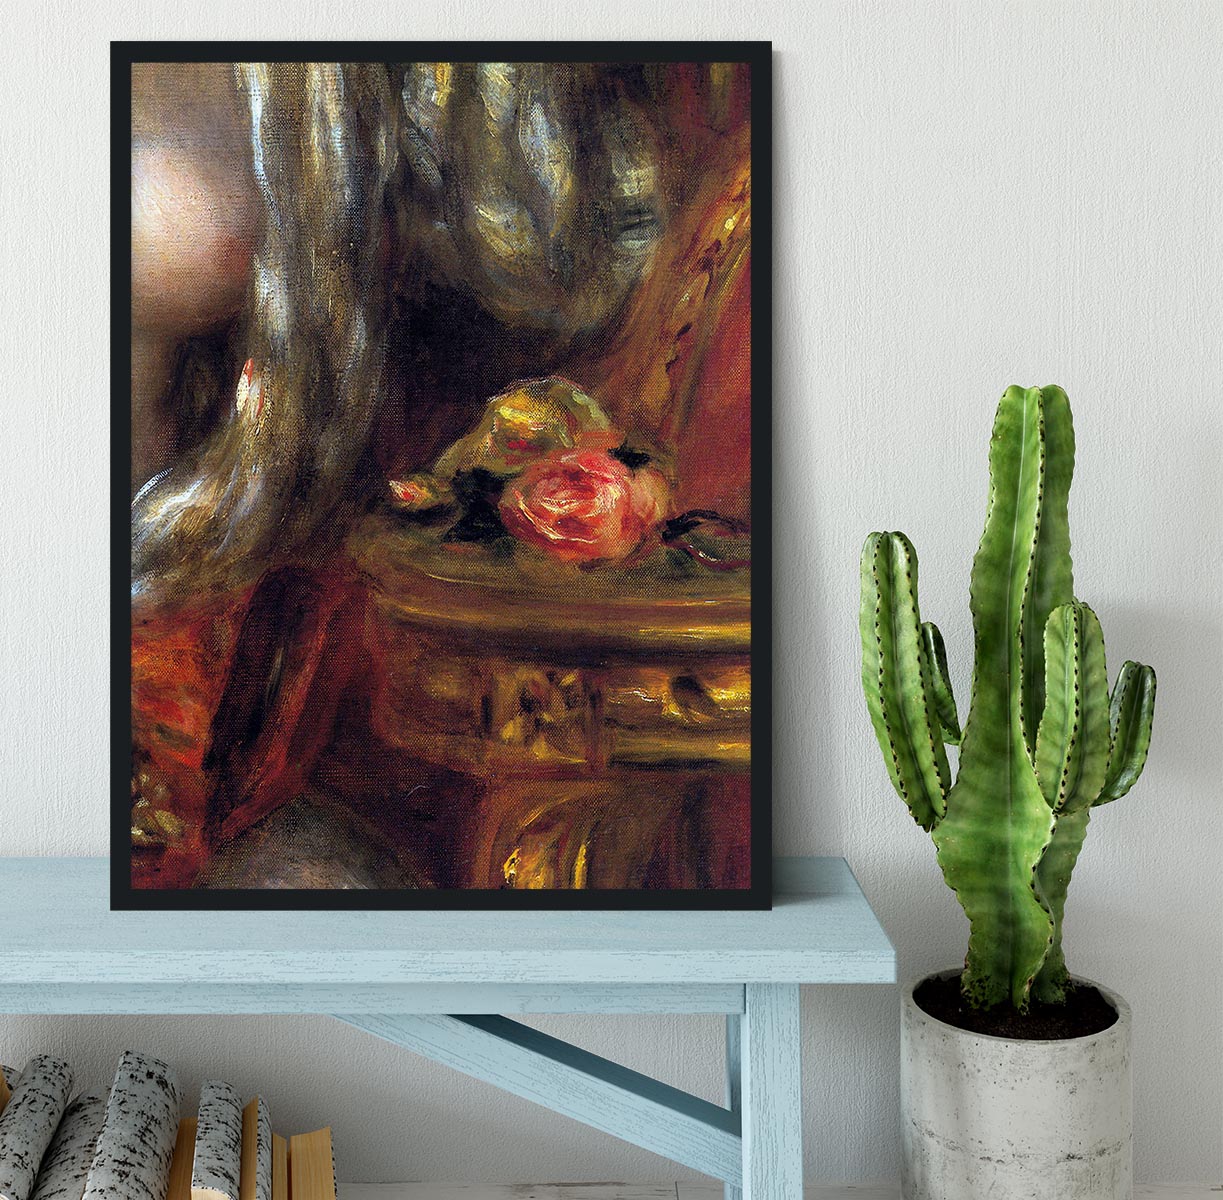 Gabrielle with jewels detail by Renoir Framed Print - Canvas Art Rocks - 2